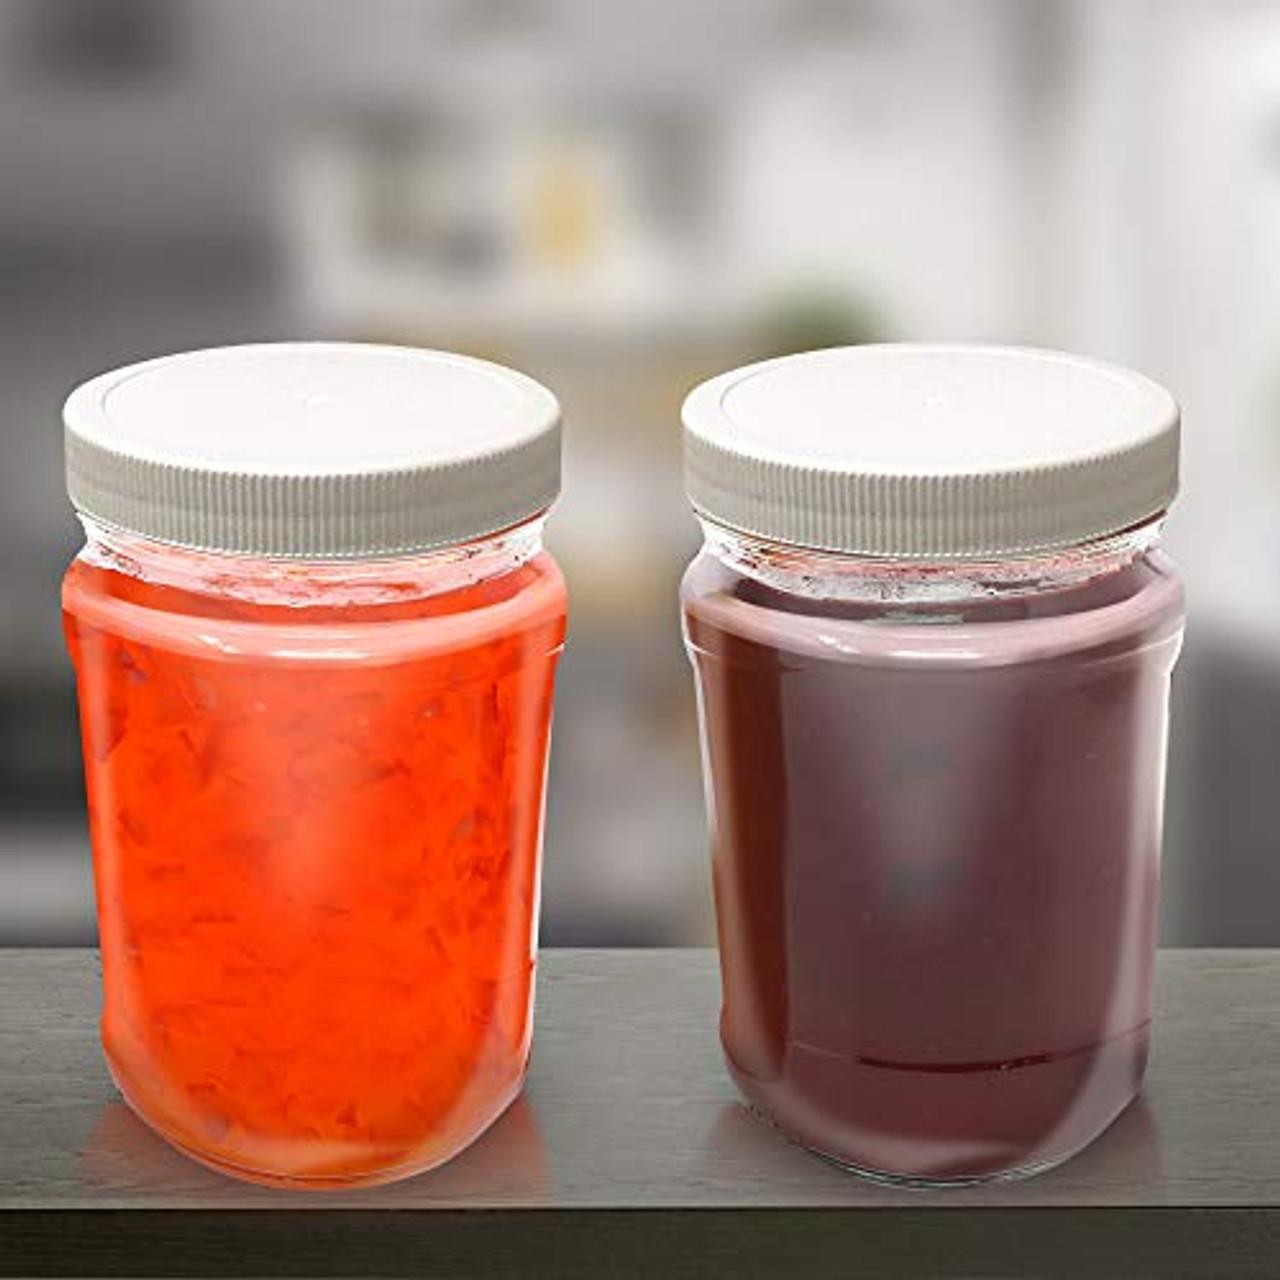 4 SLIME CONTAINERS CLEAR Plastic Jars 2 Oz 4 Oz 6 Oz 8 Oz Twisted Lid Clear  Plastic Wide-mouth Liquids Small Goods Storage Jars Slime Jars 